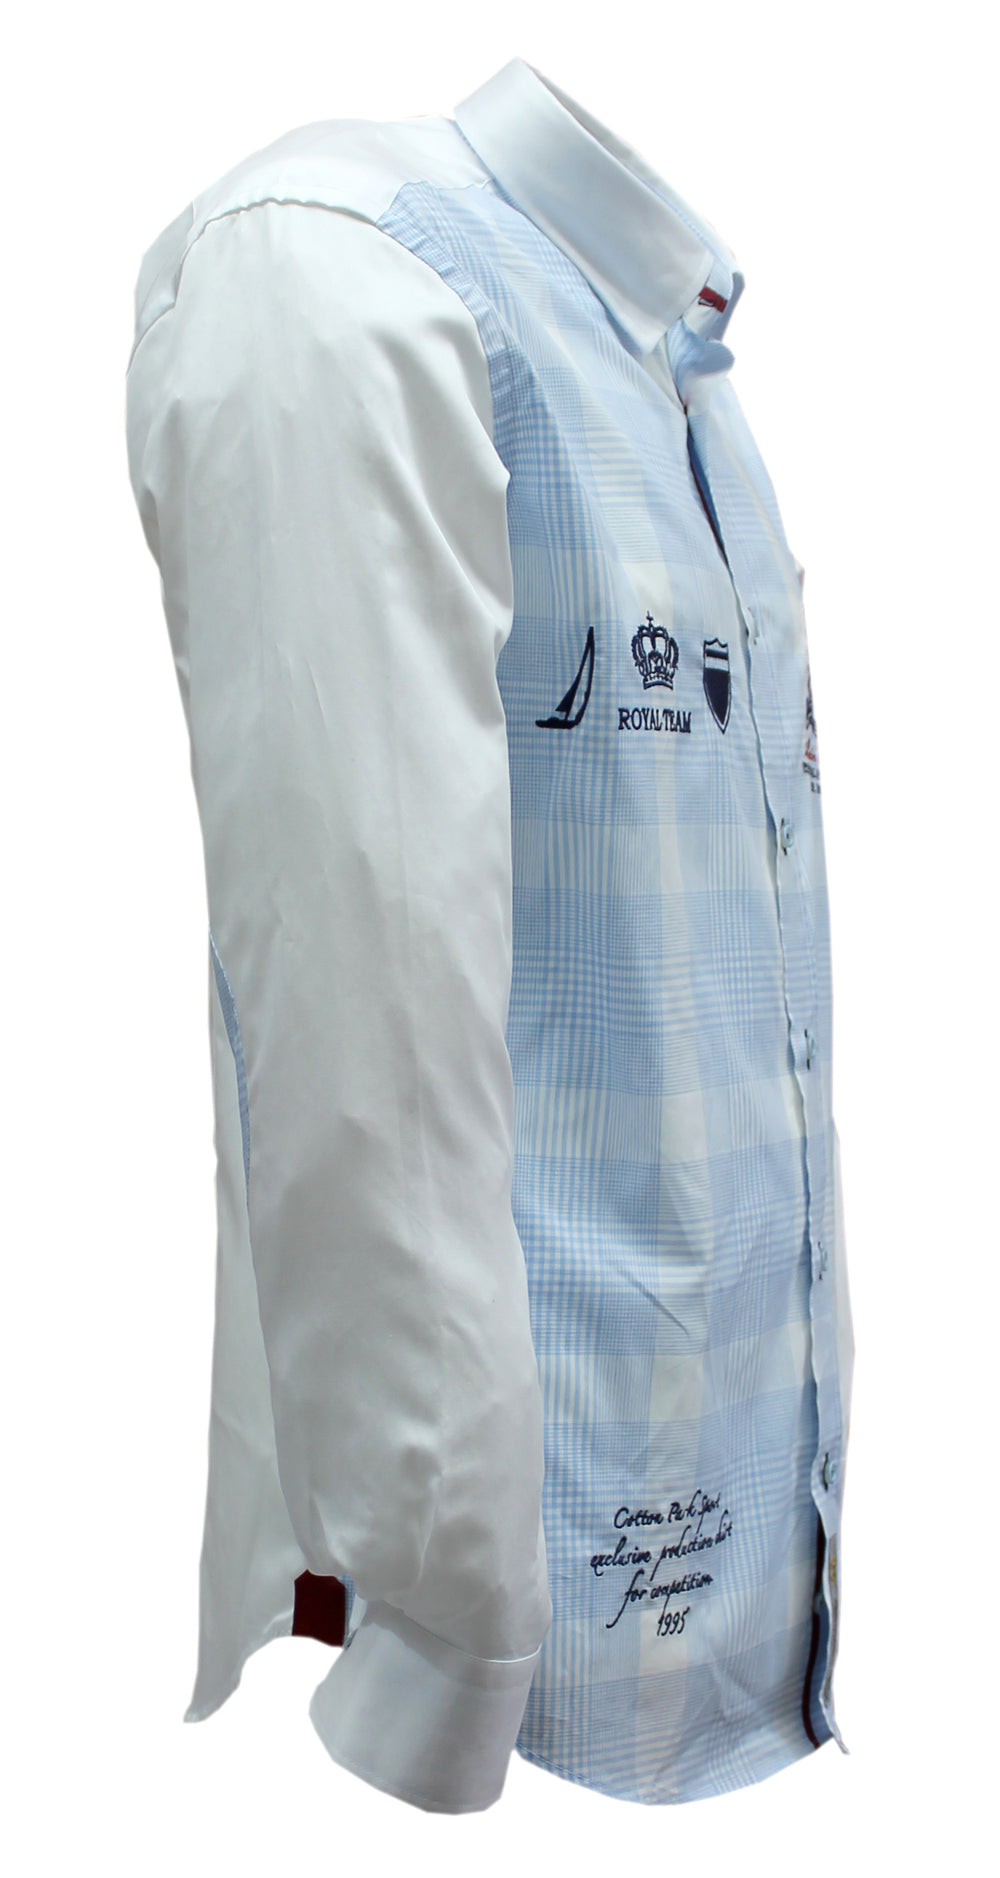 Embroidered sky blue checked sport chic shirt